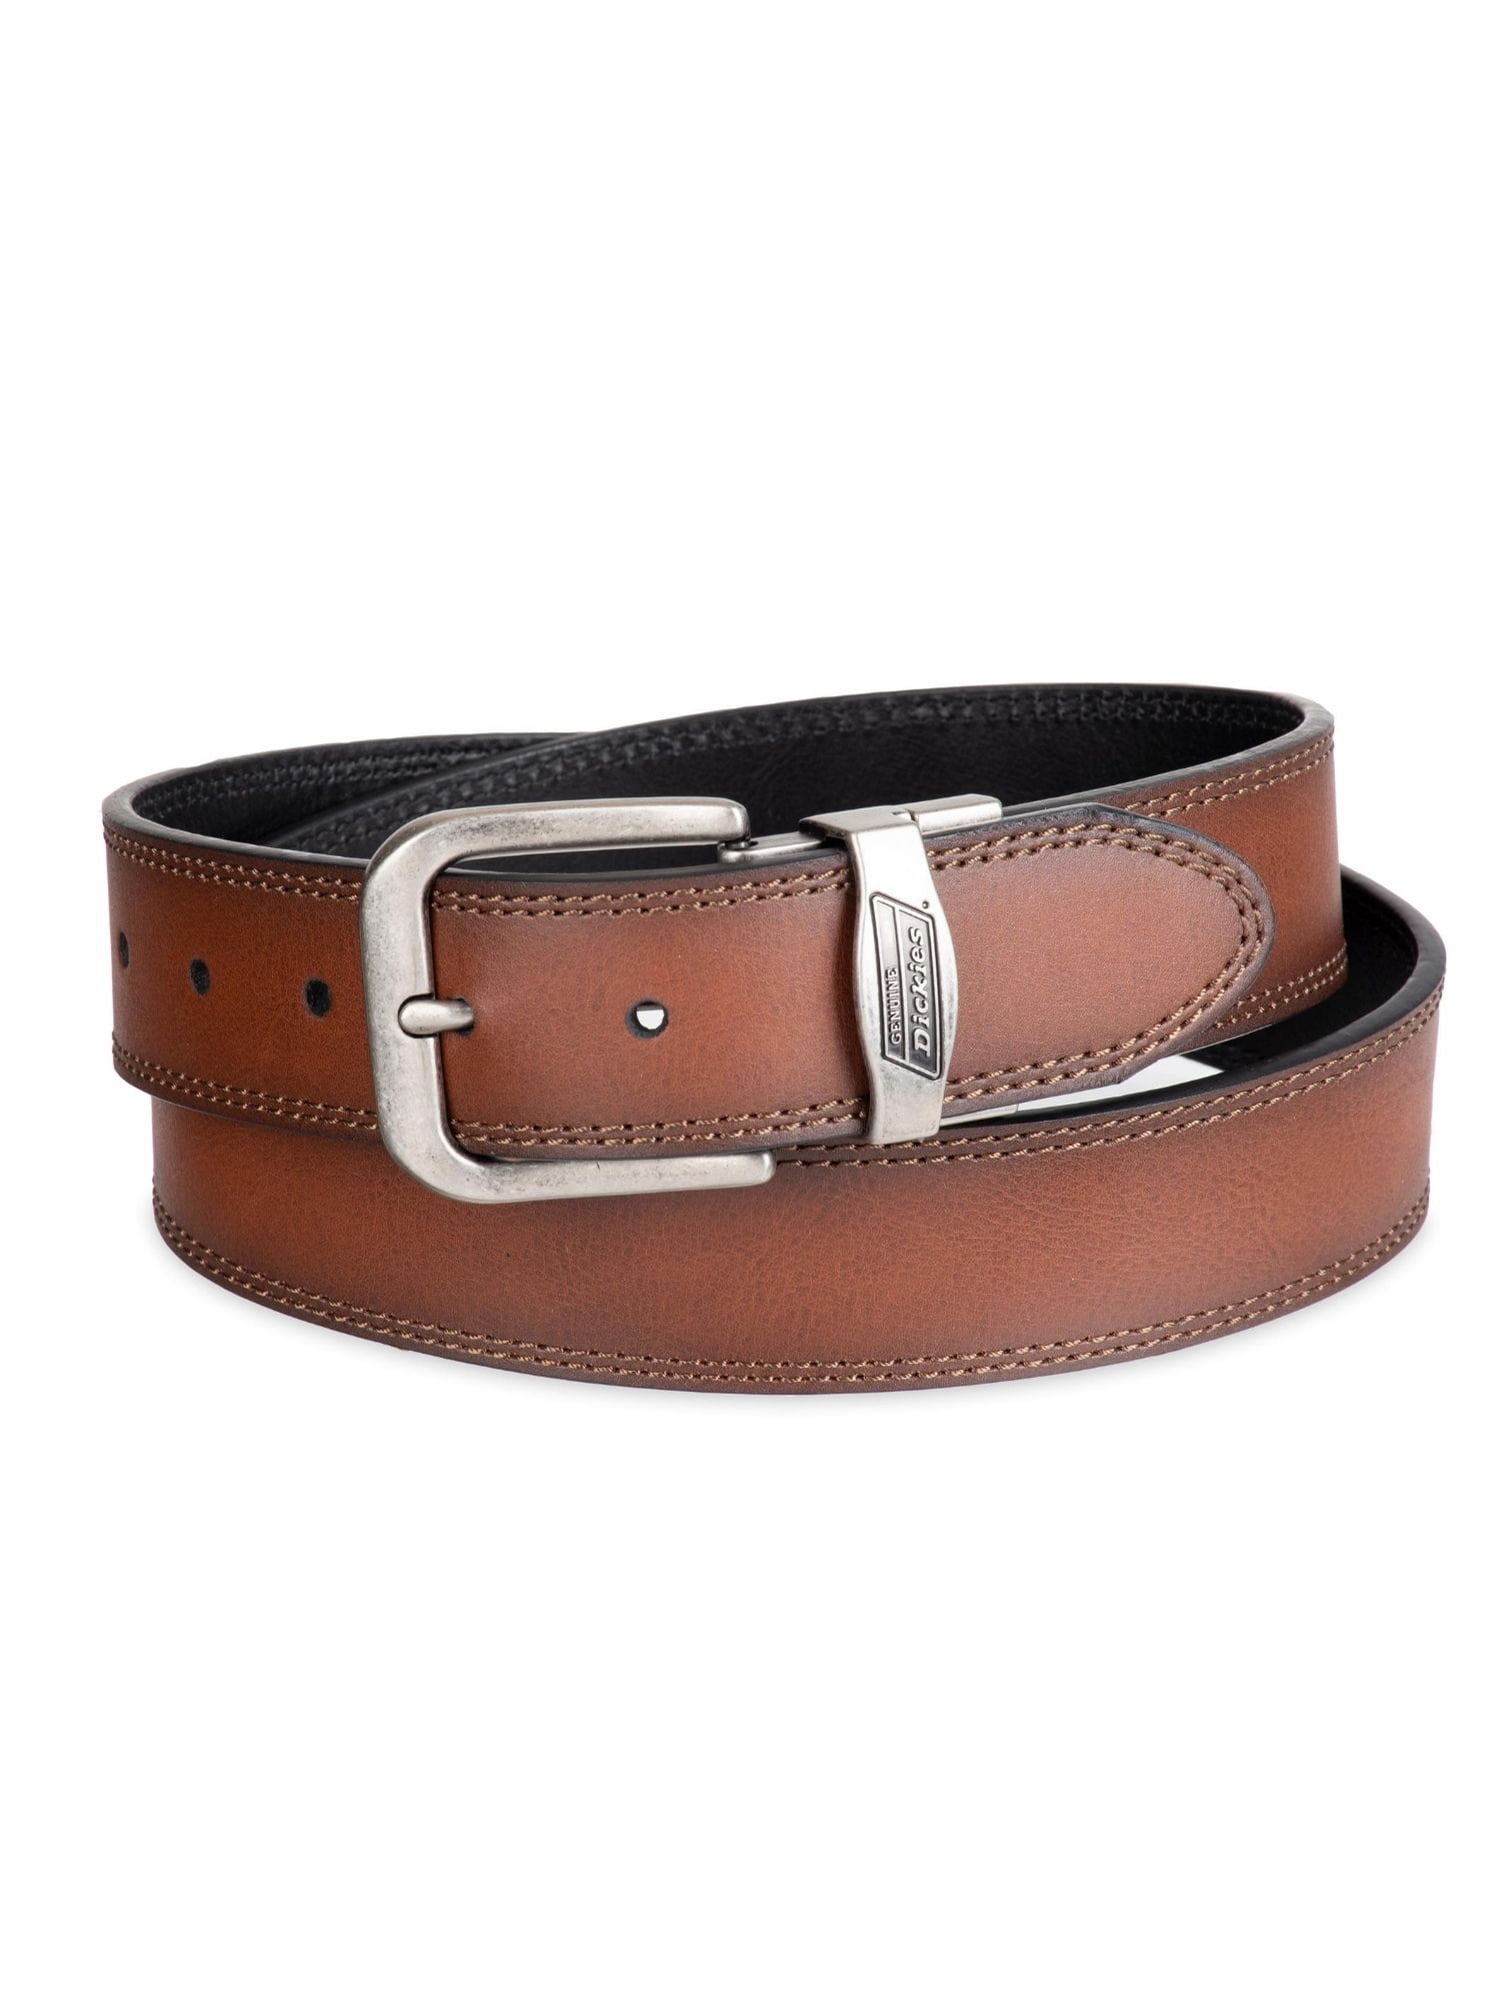 Genuine Dickies Men's Two-In-One Reversible Tan to Black Double Stitch Belt With Big & Tall Sizes